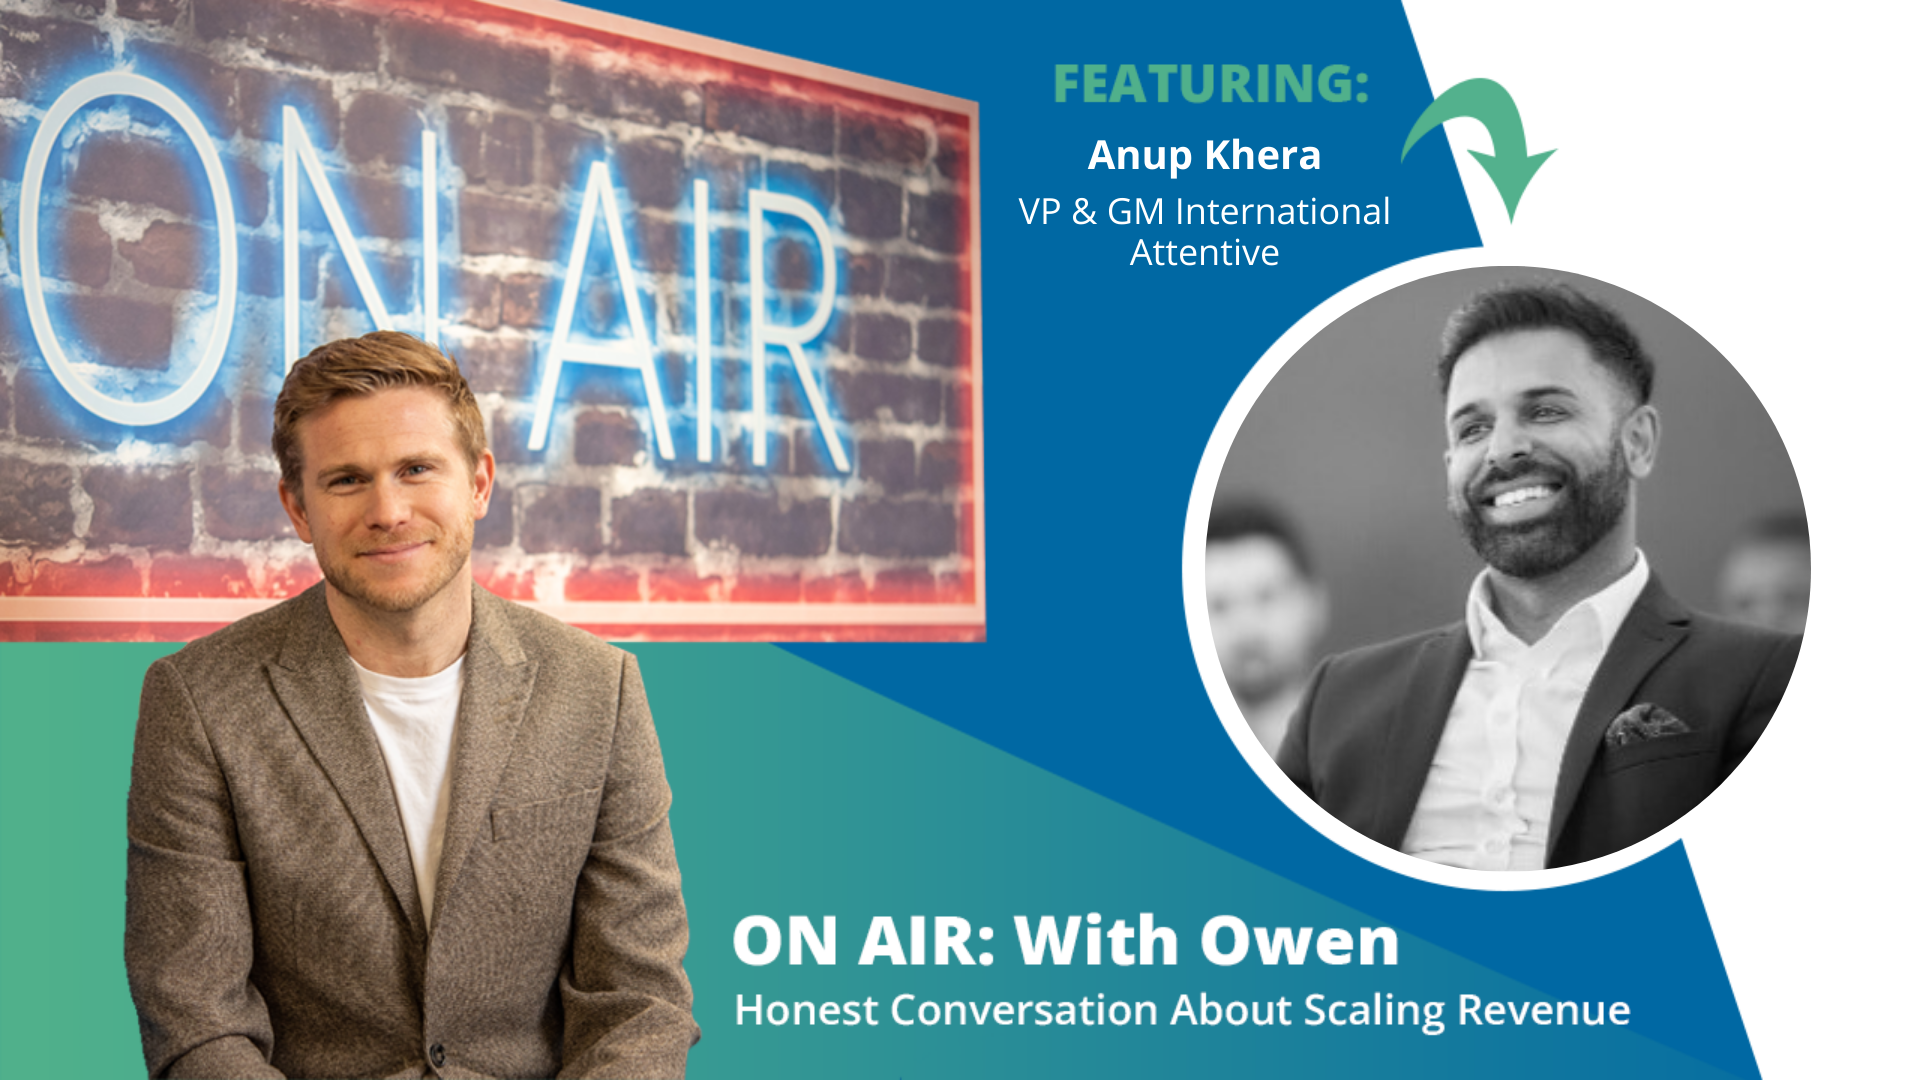 ON AIR: With Owen Episode 57 Featuring Anup Khera – VP & GM International at Attentive